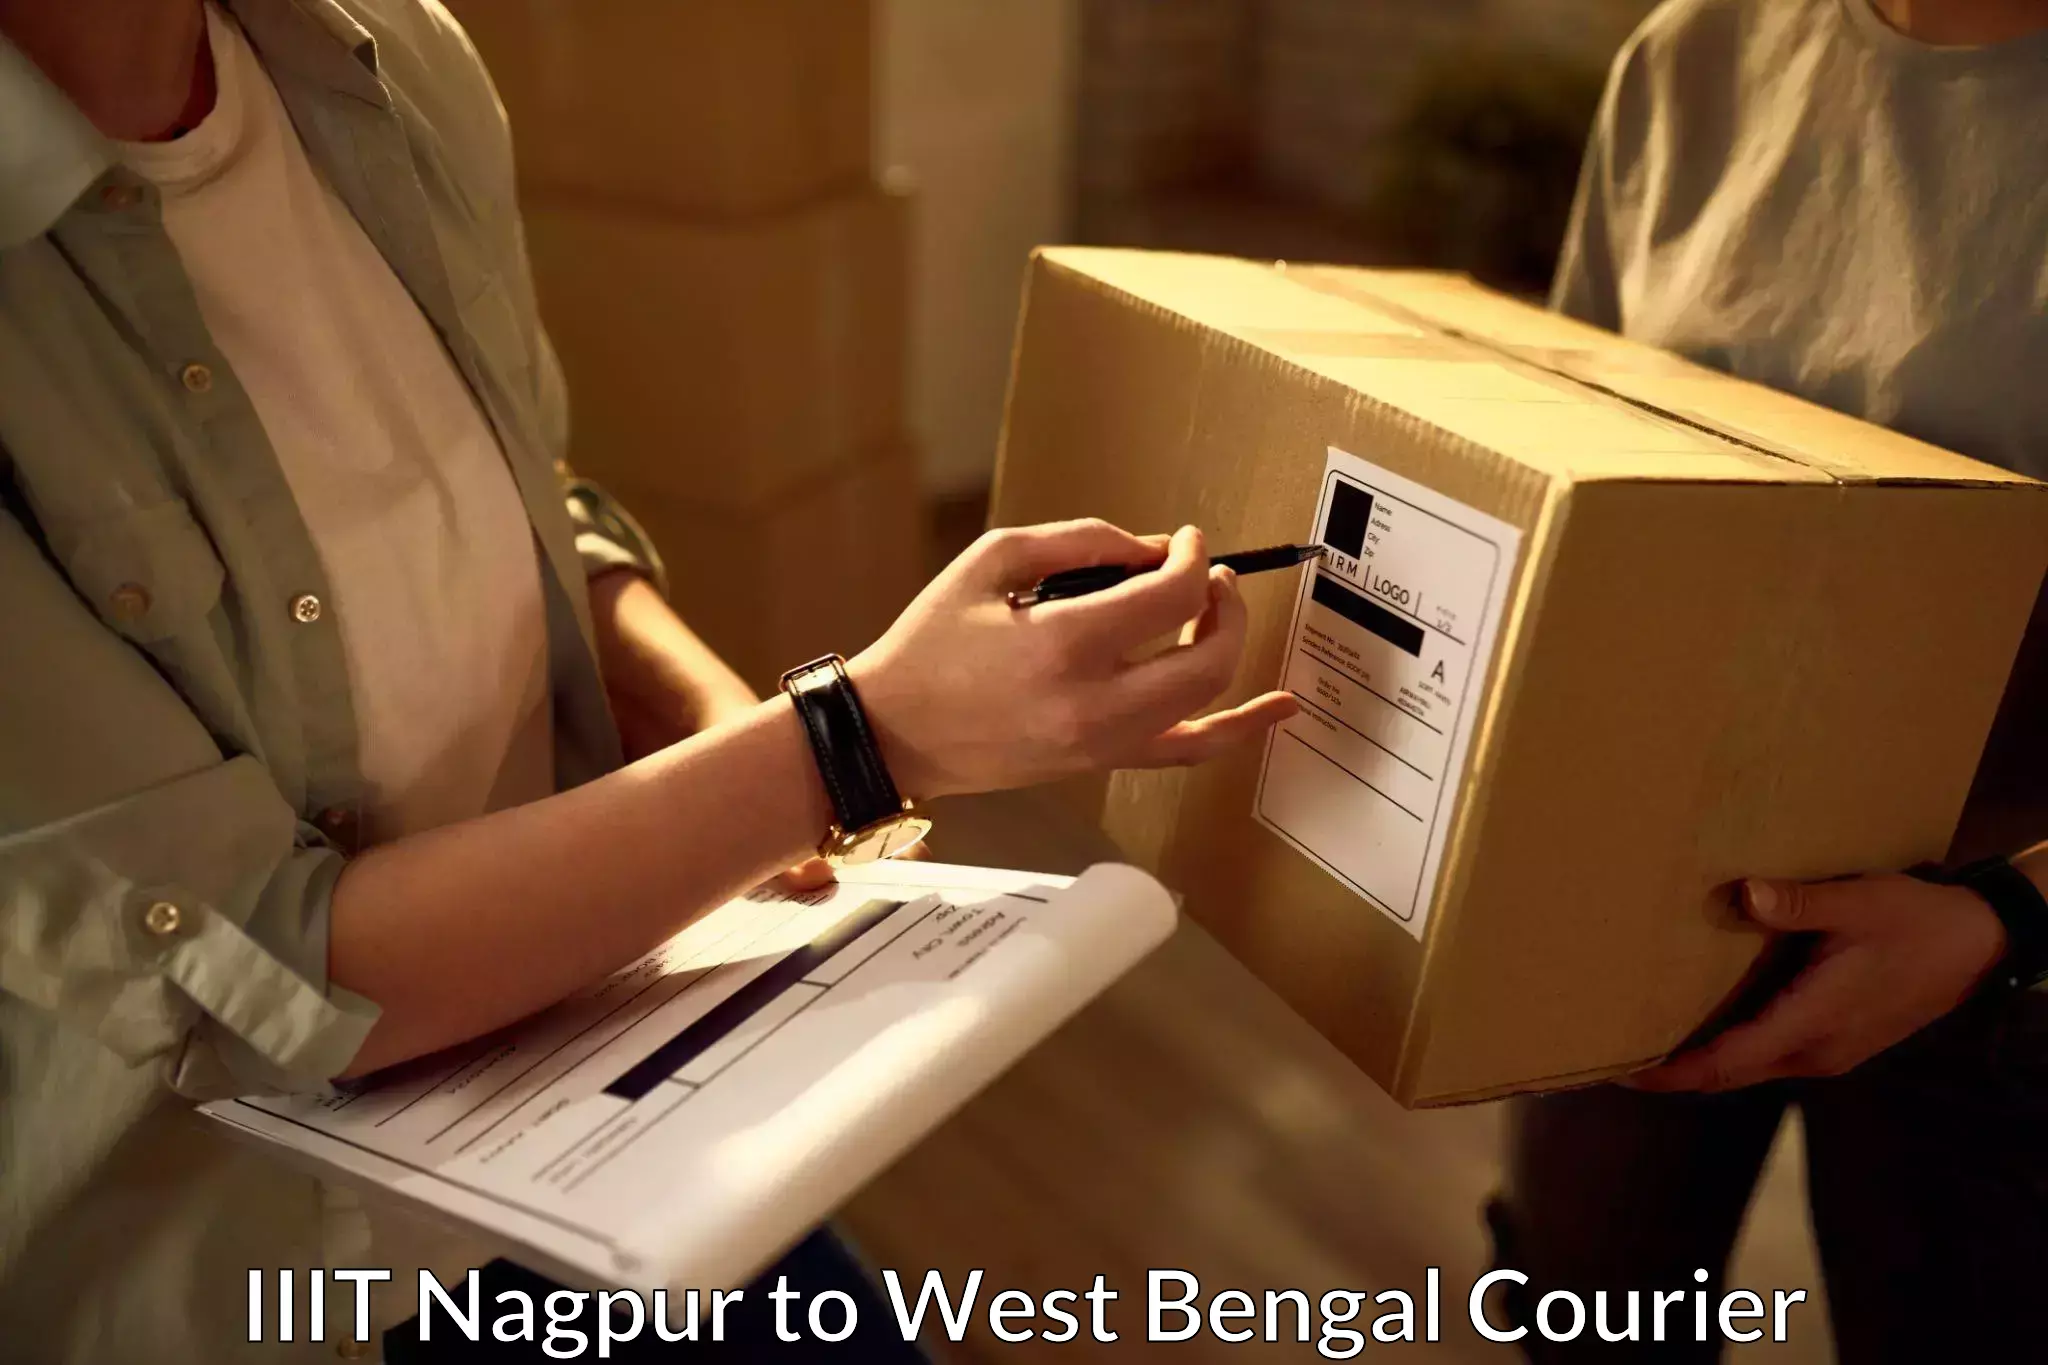 Large-scale shipping solutions IIIT Nagpur to West Bengal